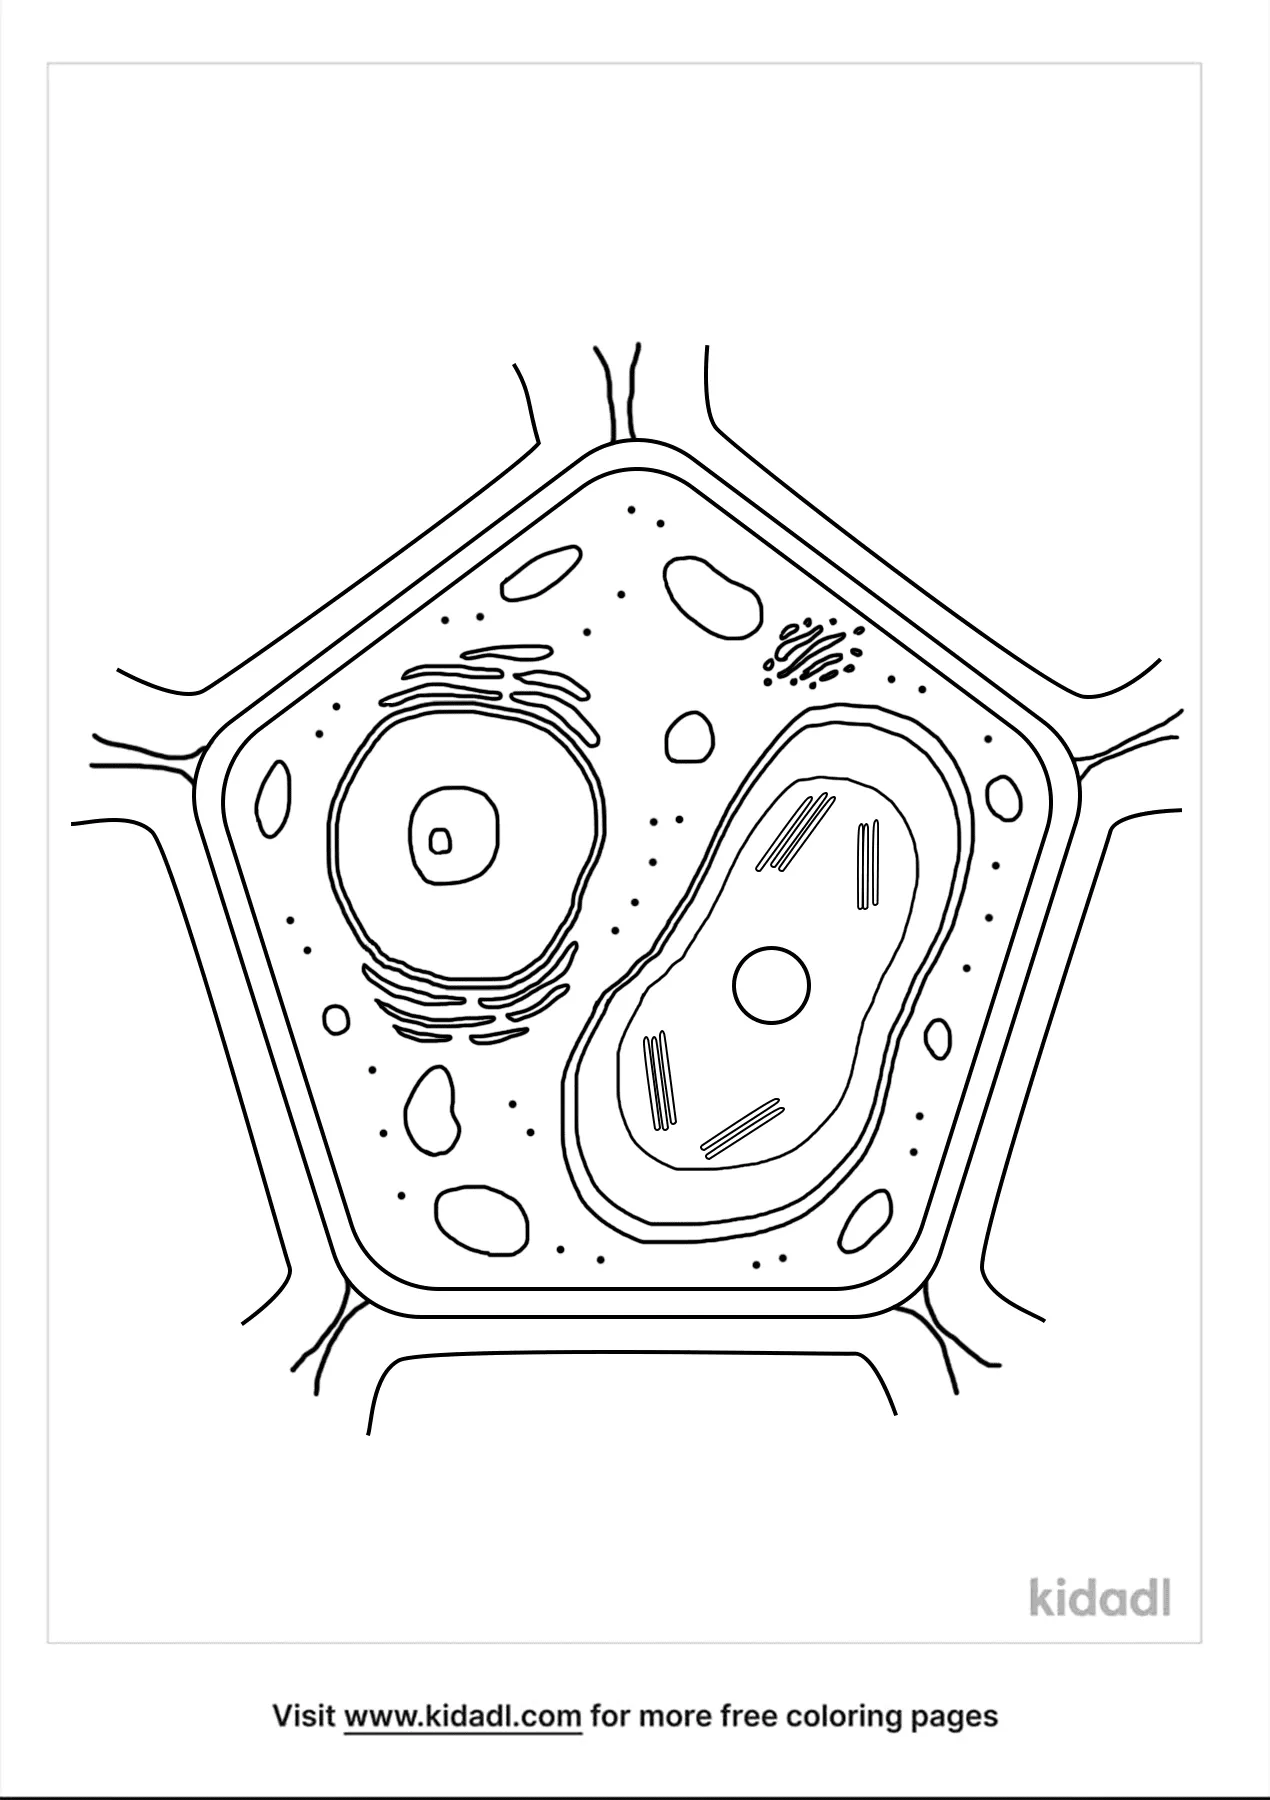 Plant Cell Coloring Pages  Free Plants Coloring Pages  Kidadl With Regard To Plant Cell Coloring Worksheet